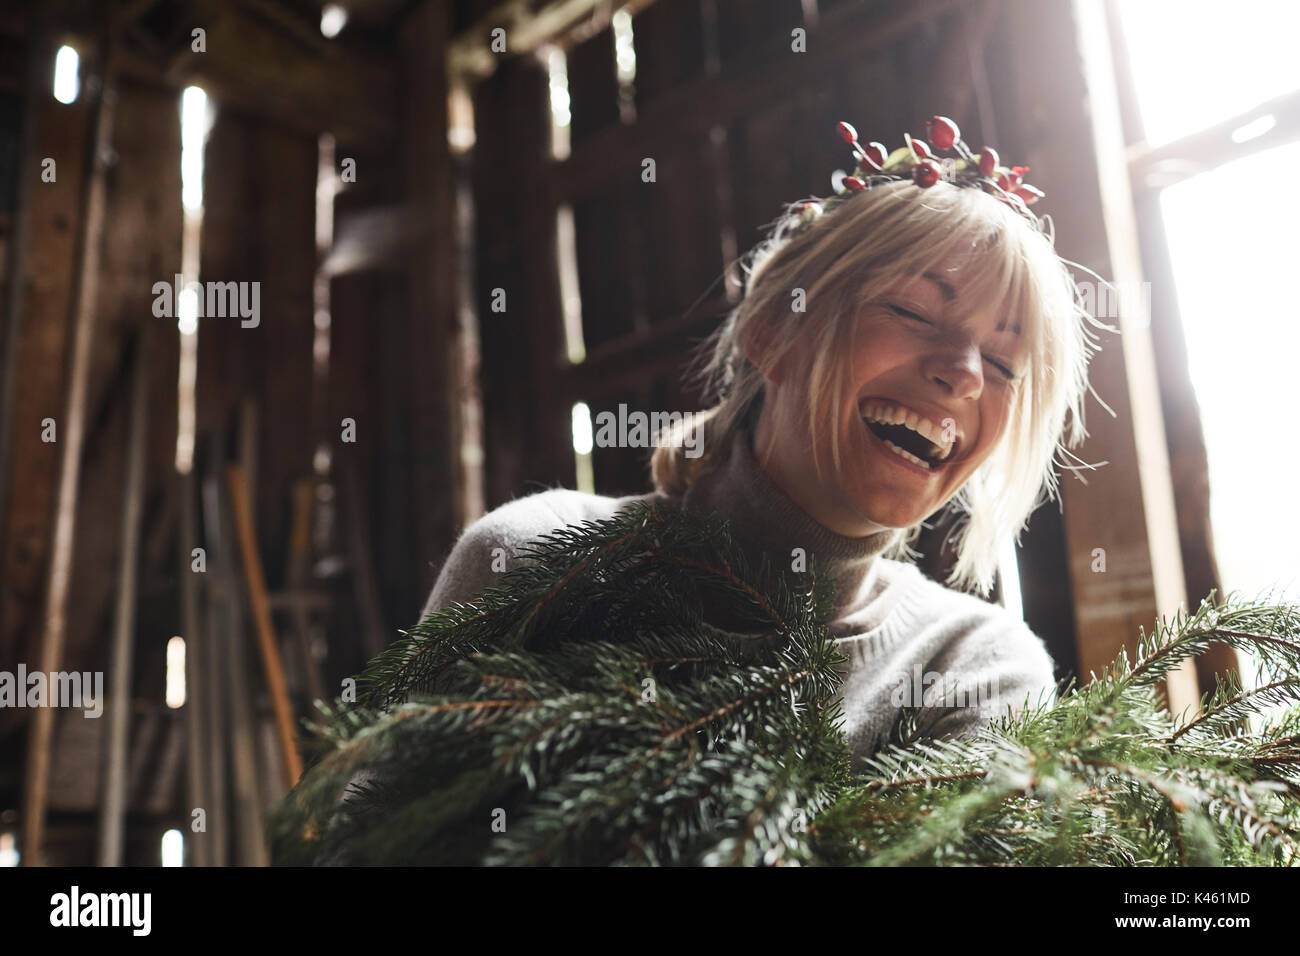 Blond woman, headdress, garland with rose hips, twigs of evergreens for decoration, laughing, portrait Stock Photo